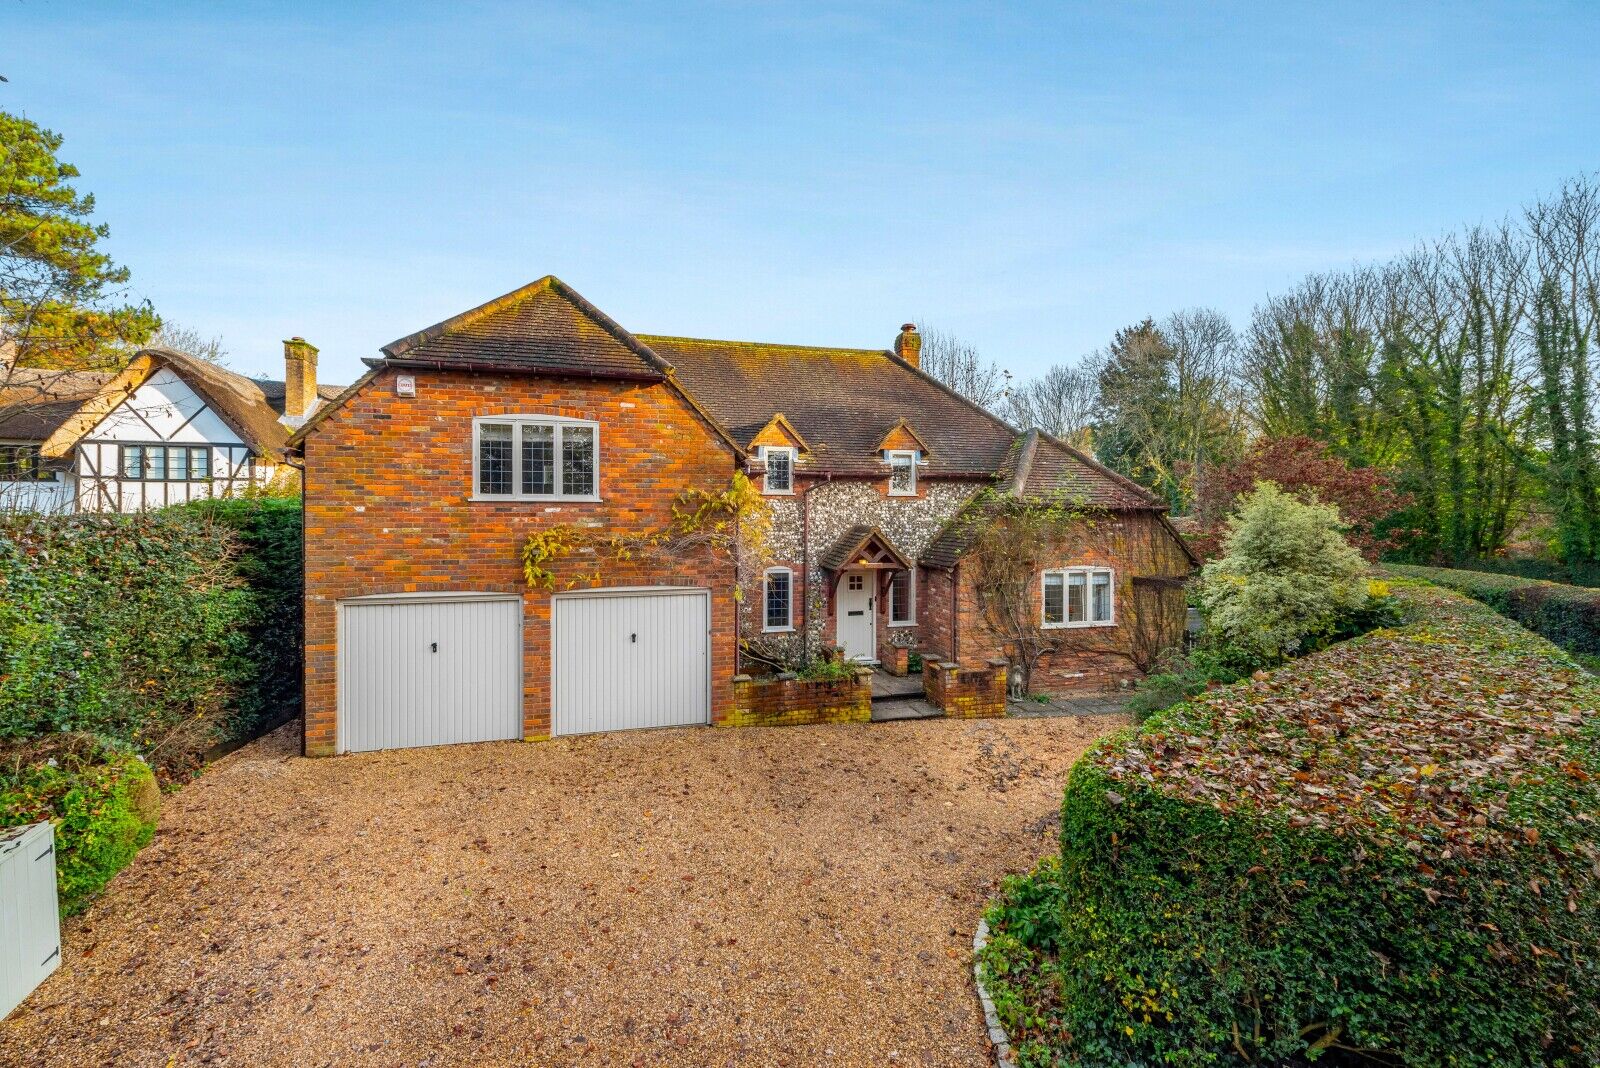 5 bedroom detached house for sale Church Lane, Lacey Green, HP27, main image